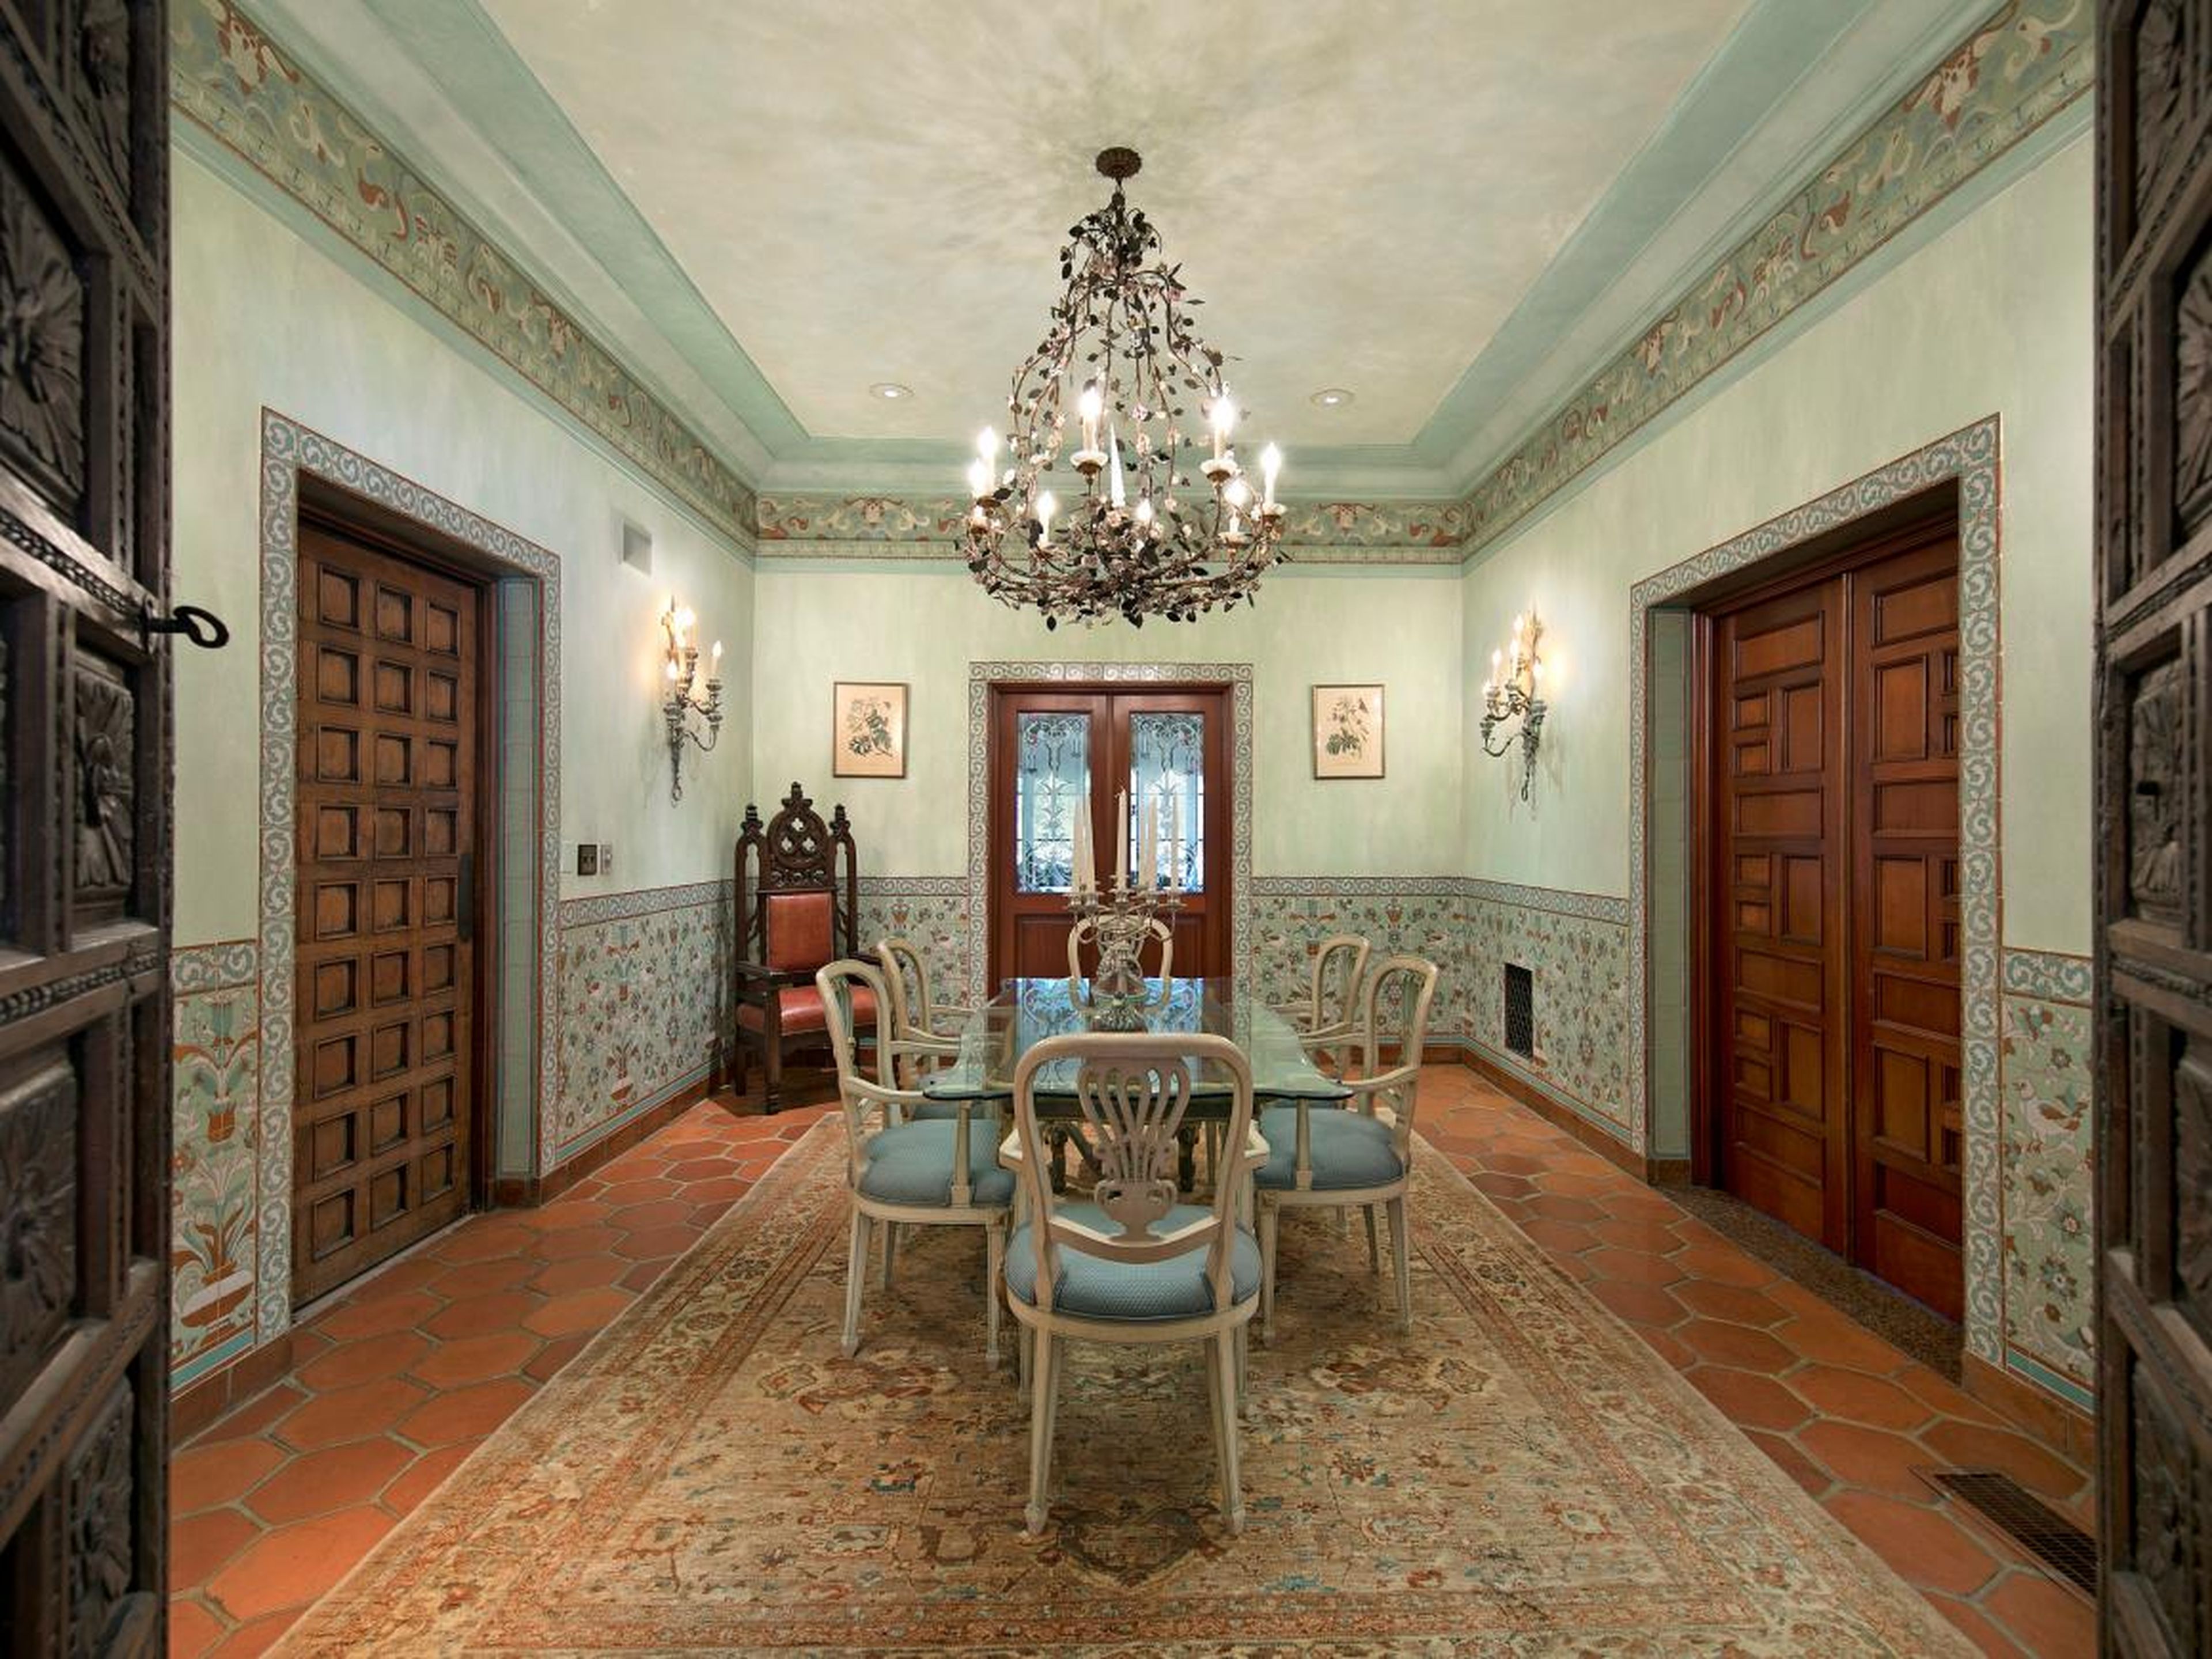 Just imagine eating dinner in this formal dining room.